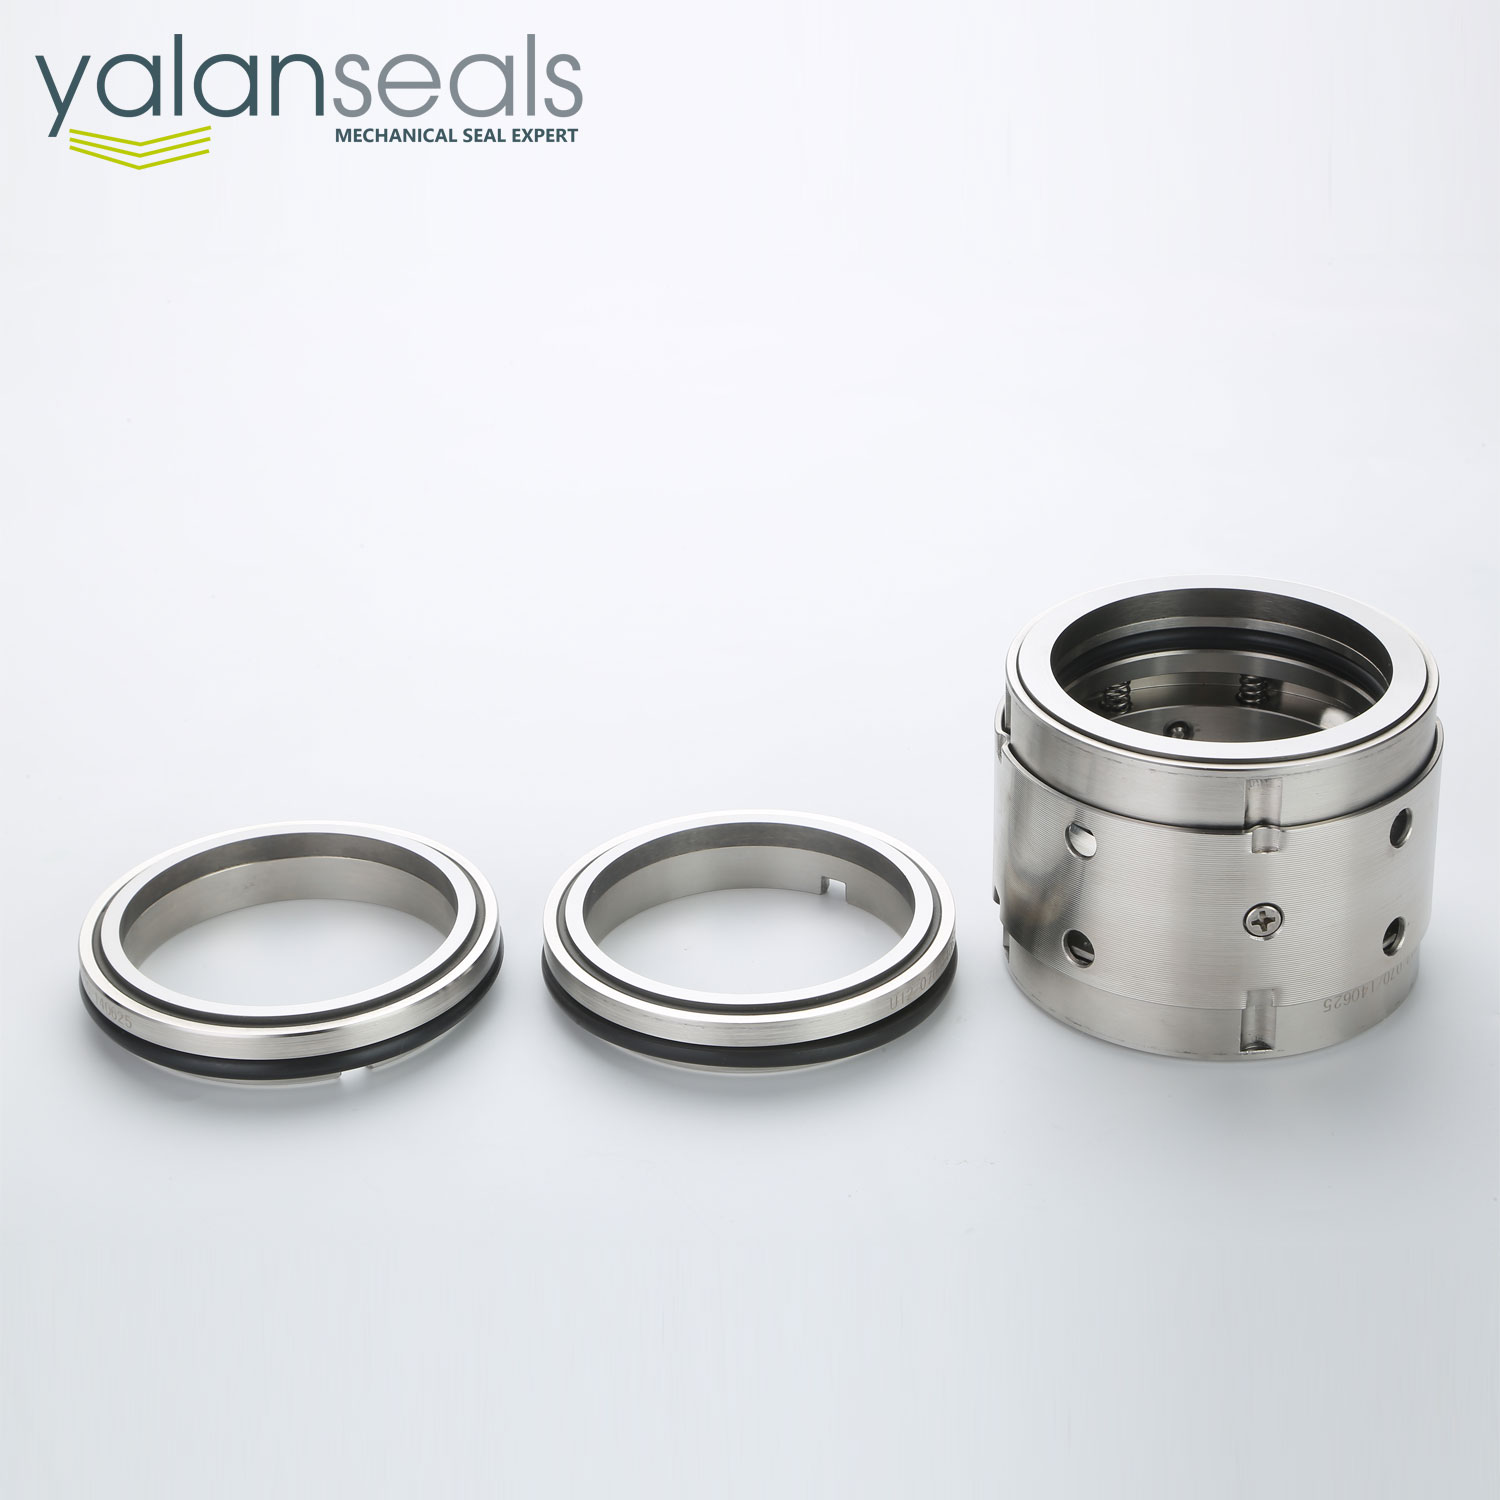 YALAN 224TM Double End Mechanical Seals for Mixers and Pumps